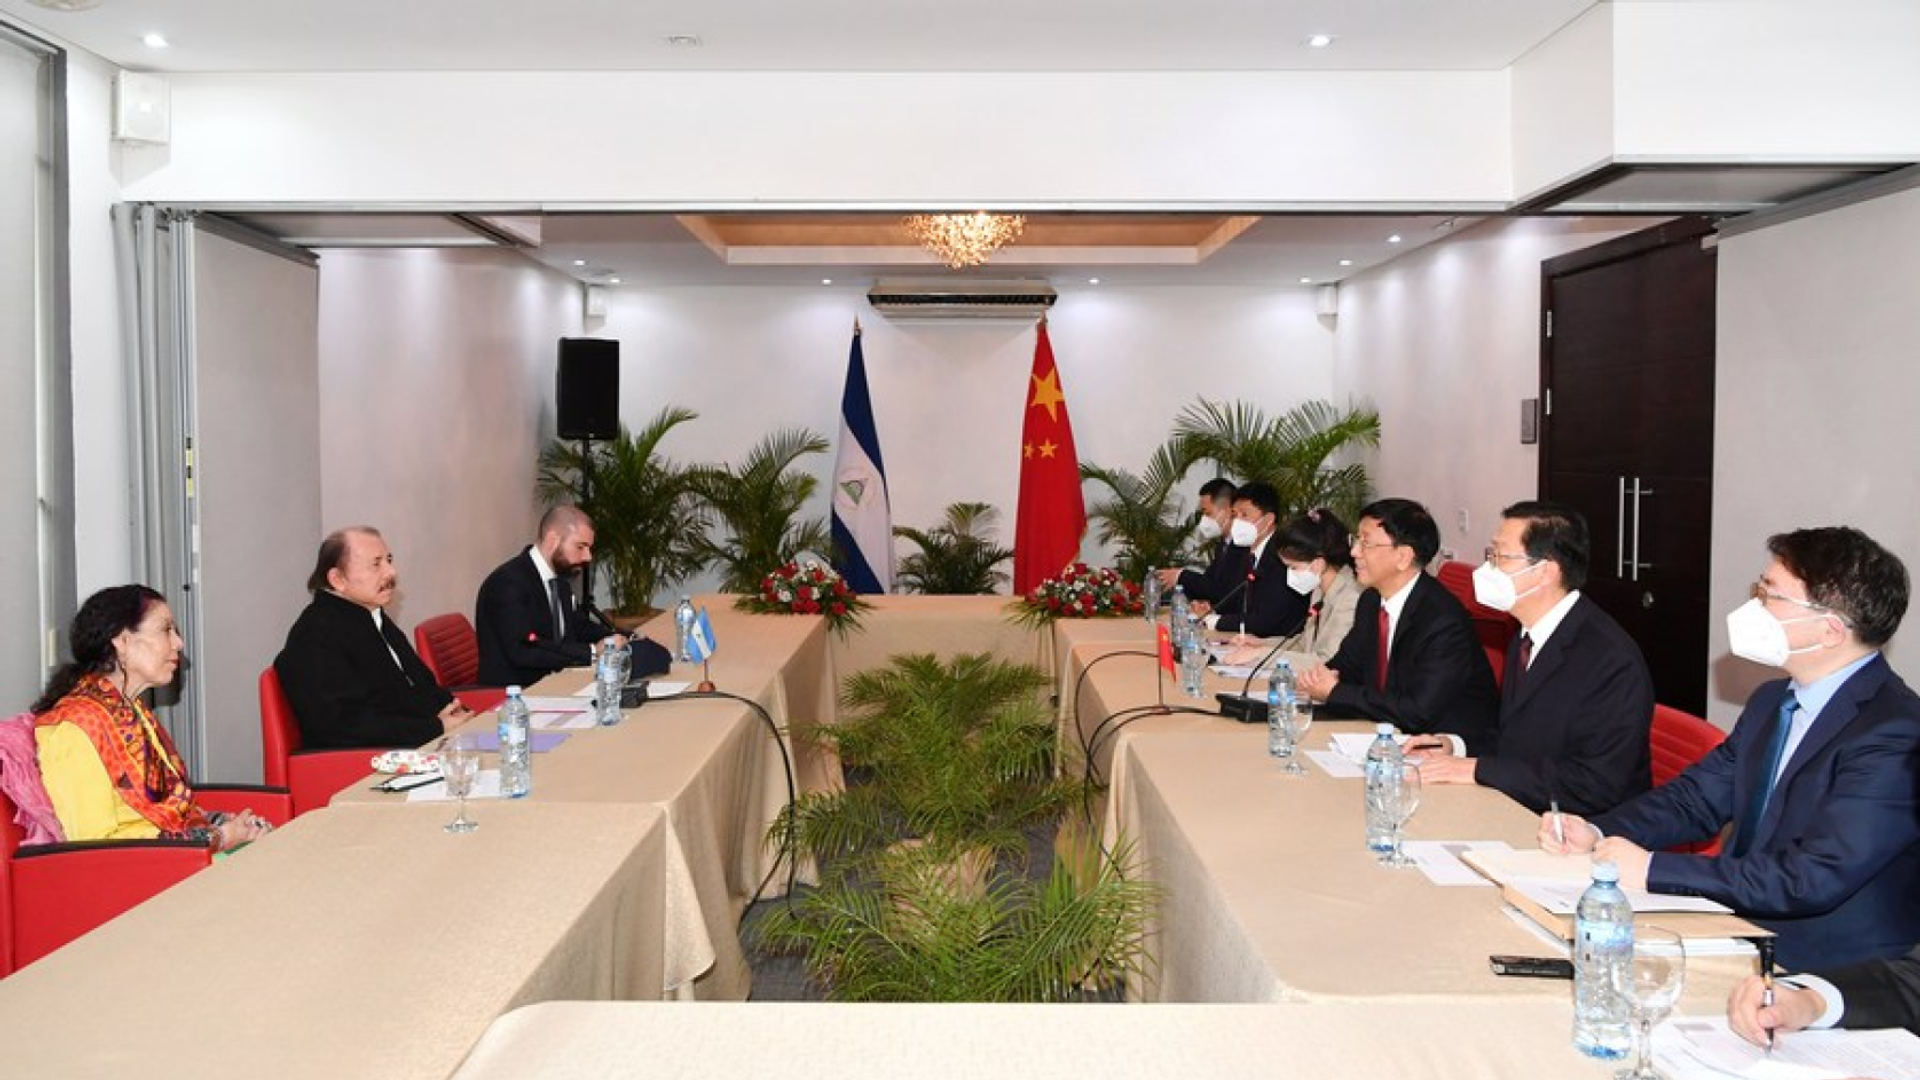 Chinese President Xi Jinping's special envoy Cao Jianming (3rd R), also vice chairman of the Standing Committee of the National People's Congress of China, meets with Nicaraguan President Daniel Ortega (2nd L) in Managua, Nicaragua, Jan. 10, 2022. - Sputnik International, 1920, 11.01.2022